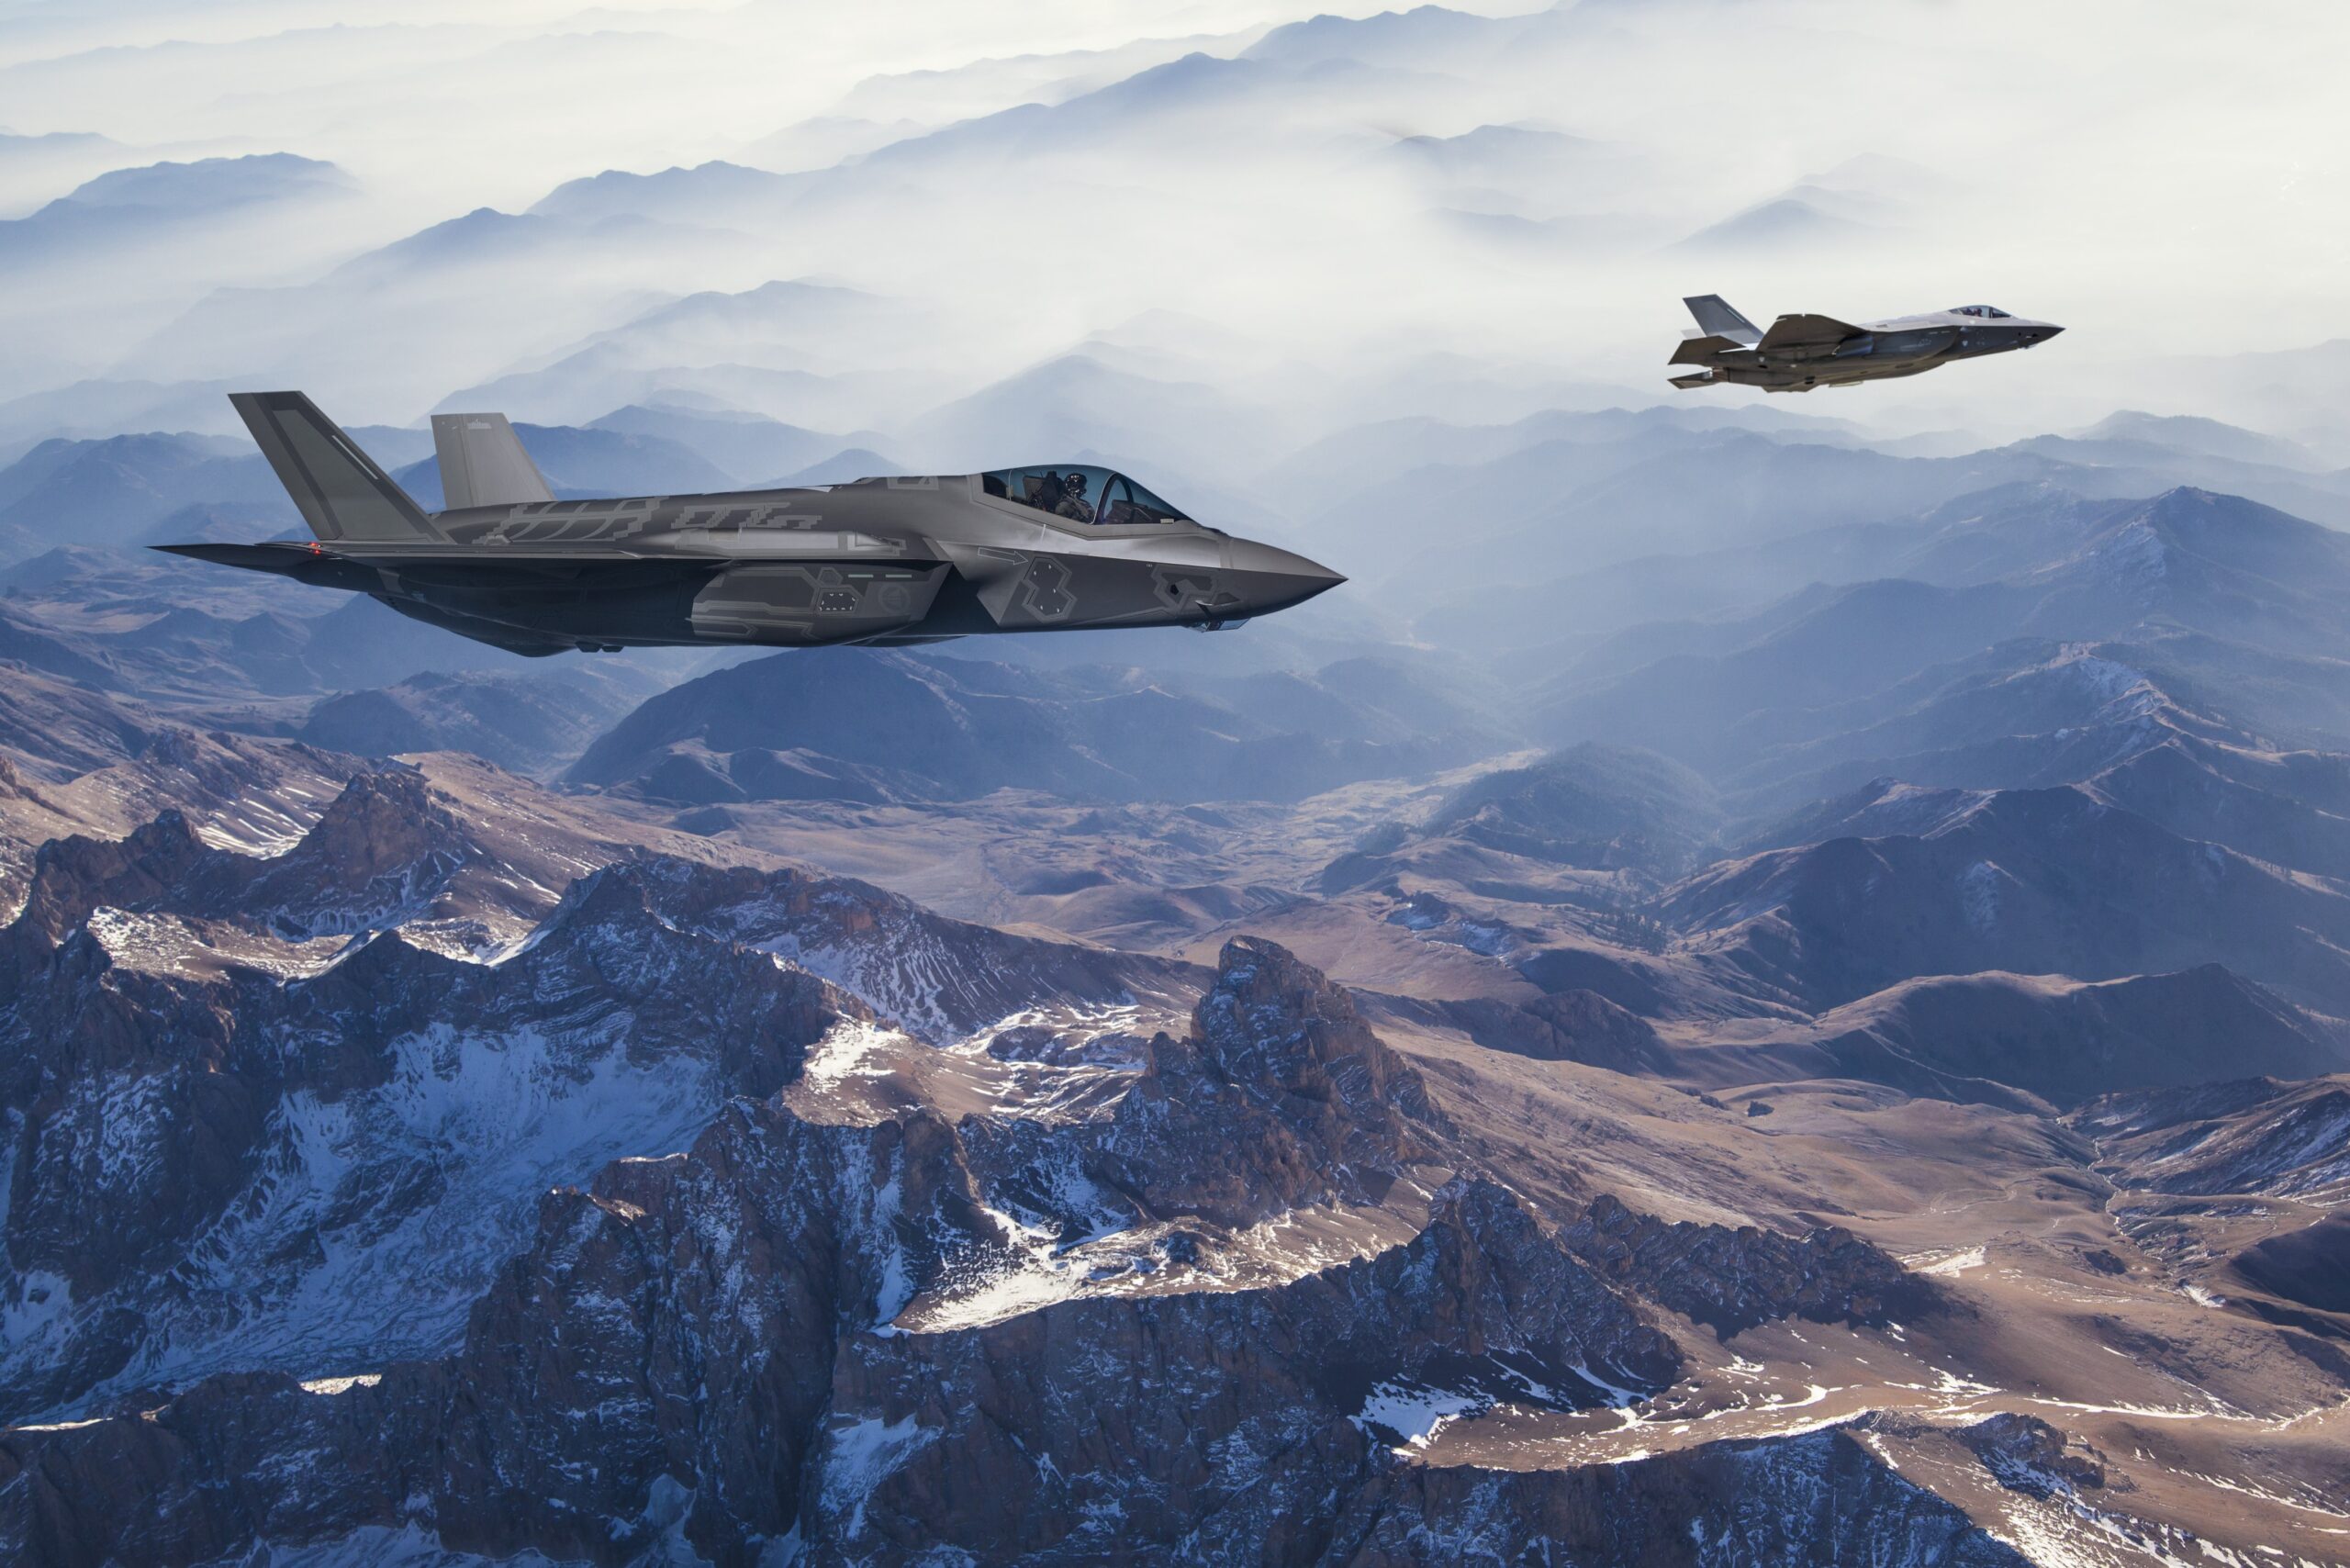 Two fighter jets flying high above a mountainous landscape.